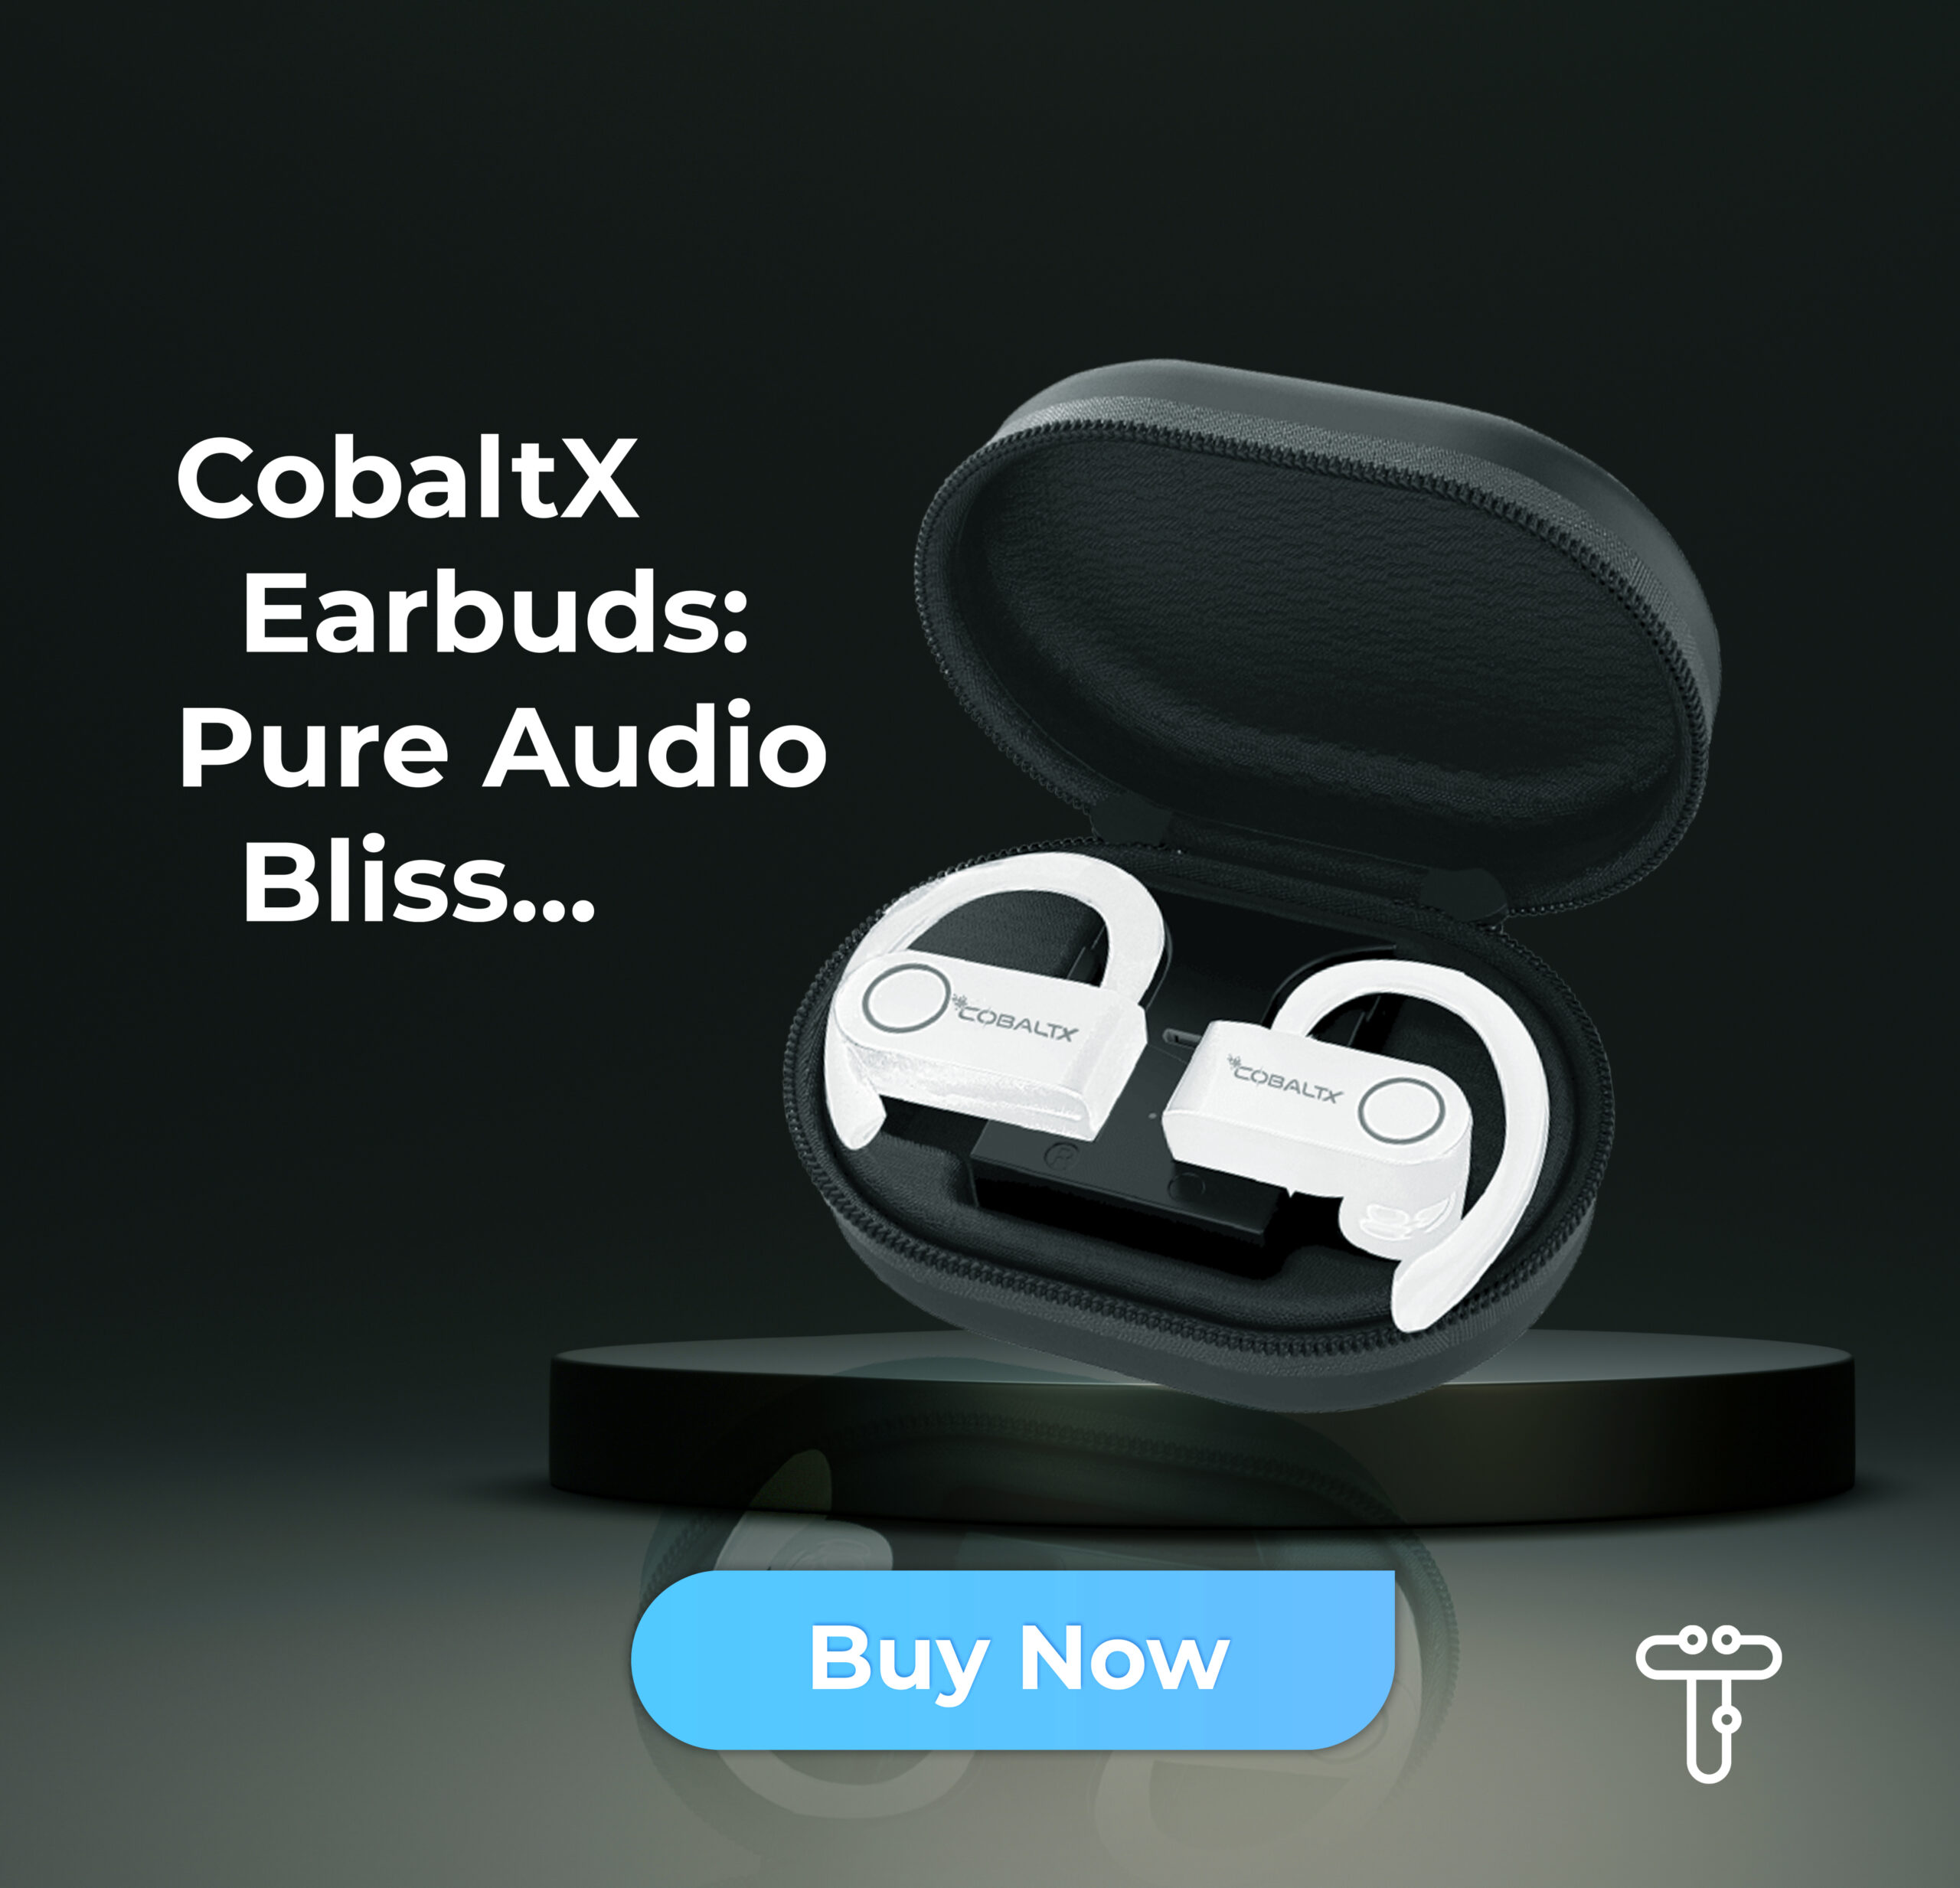 CobaltX Wireless Earbuds image1